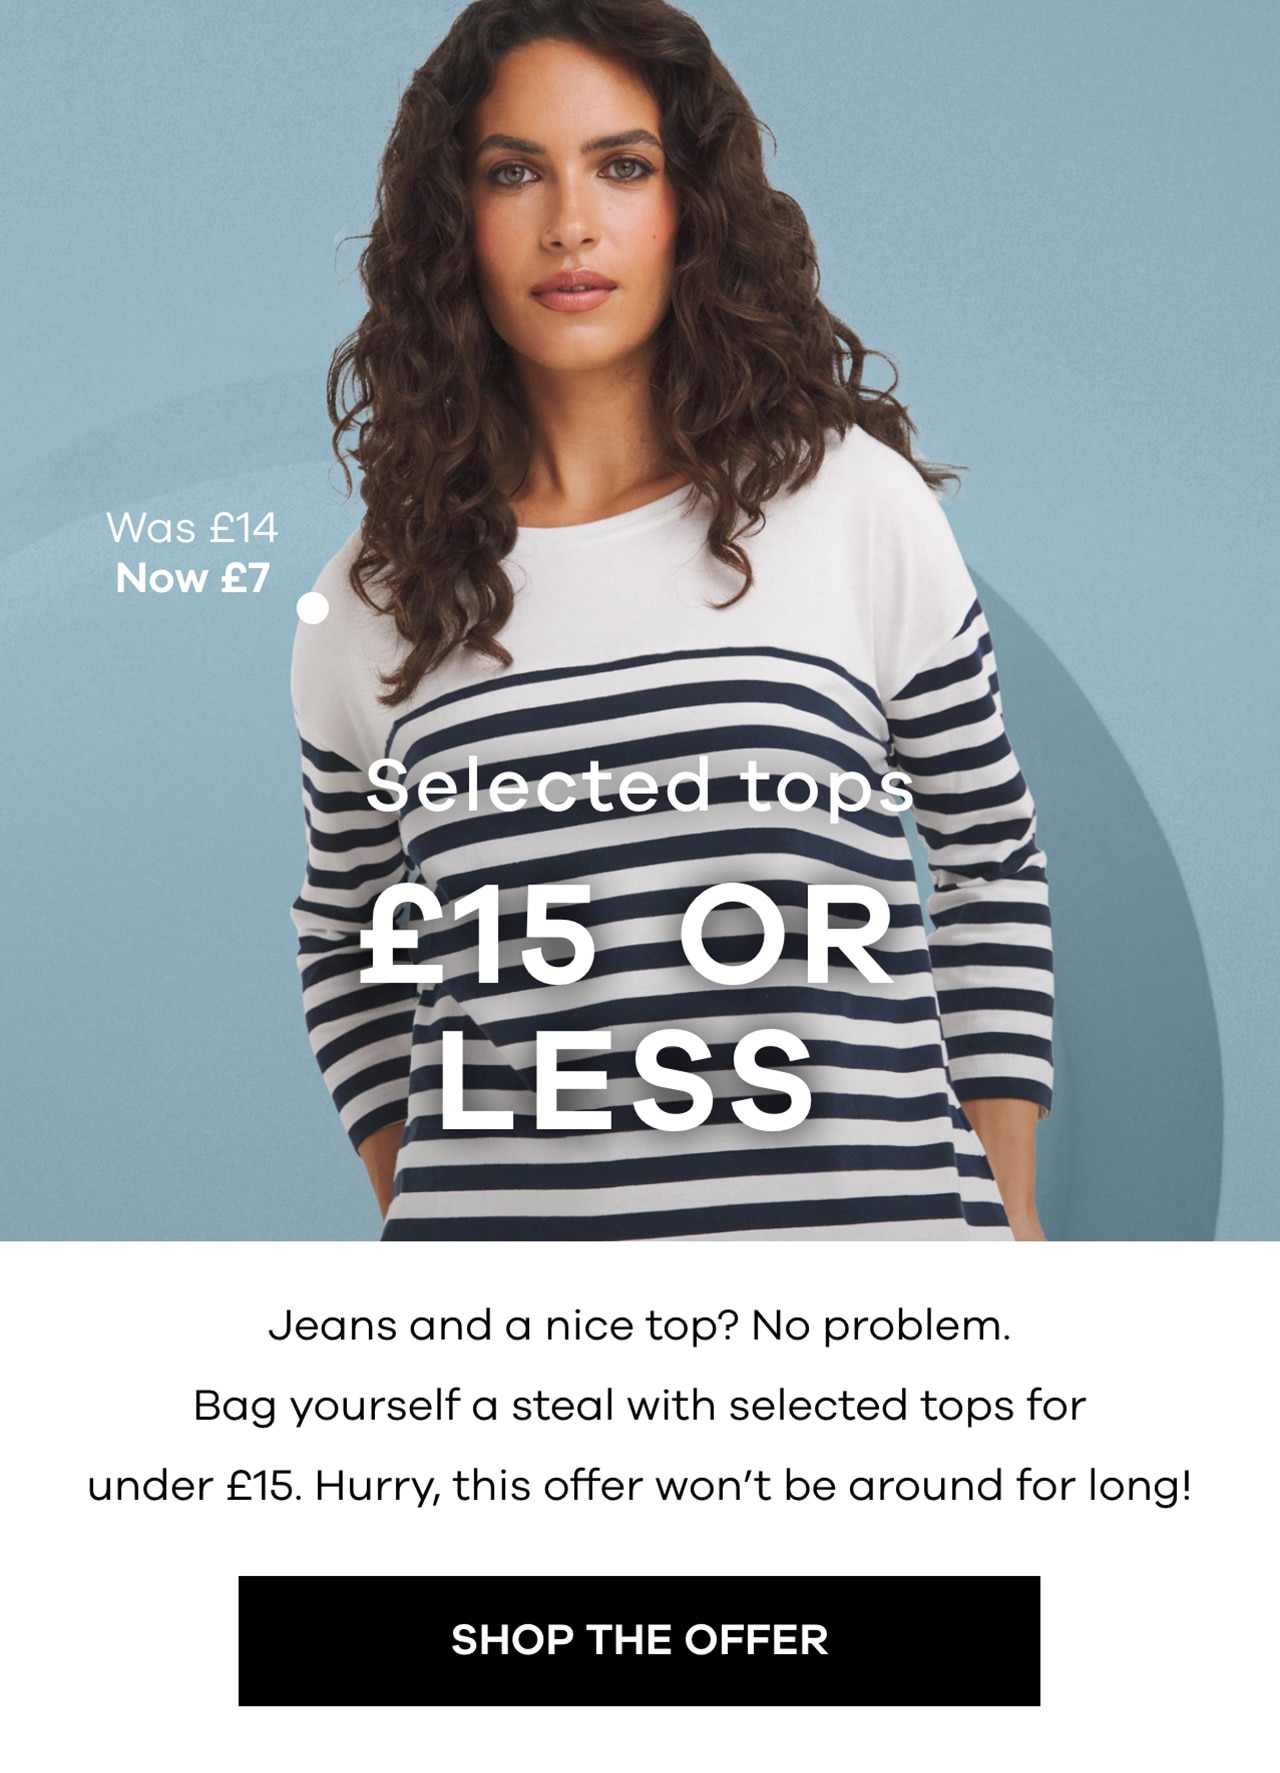 Selected tops 15 or less